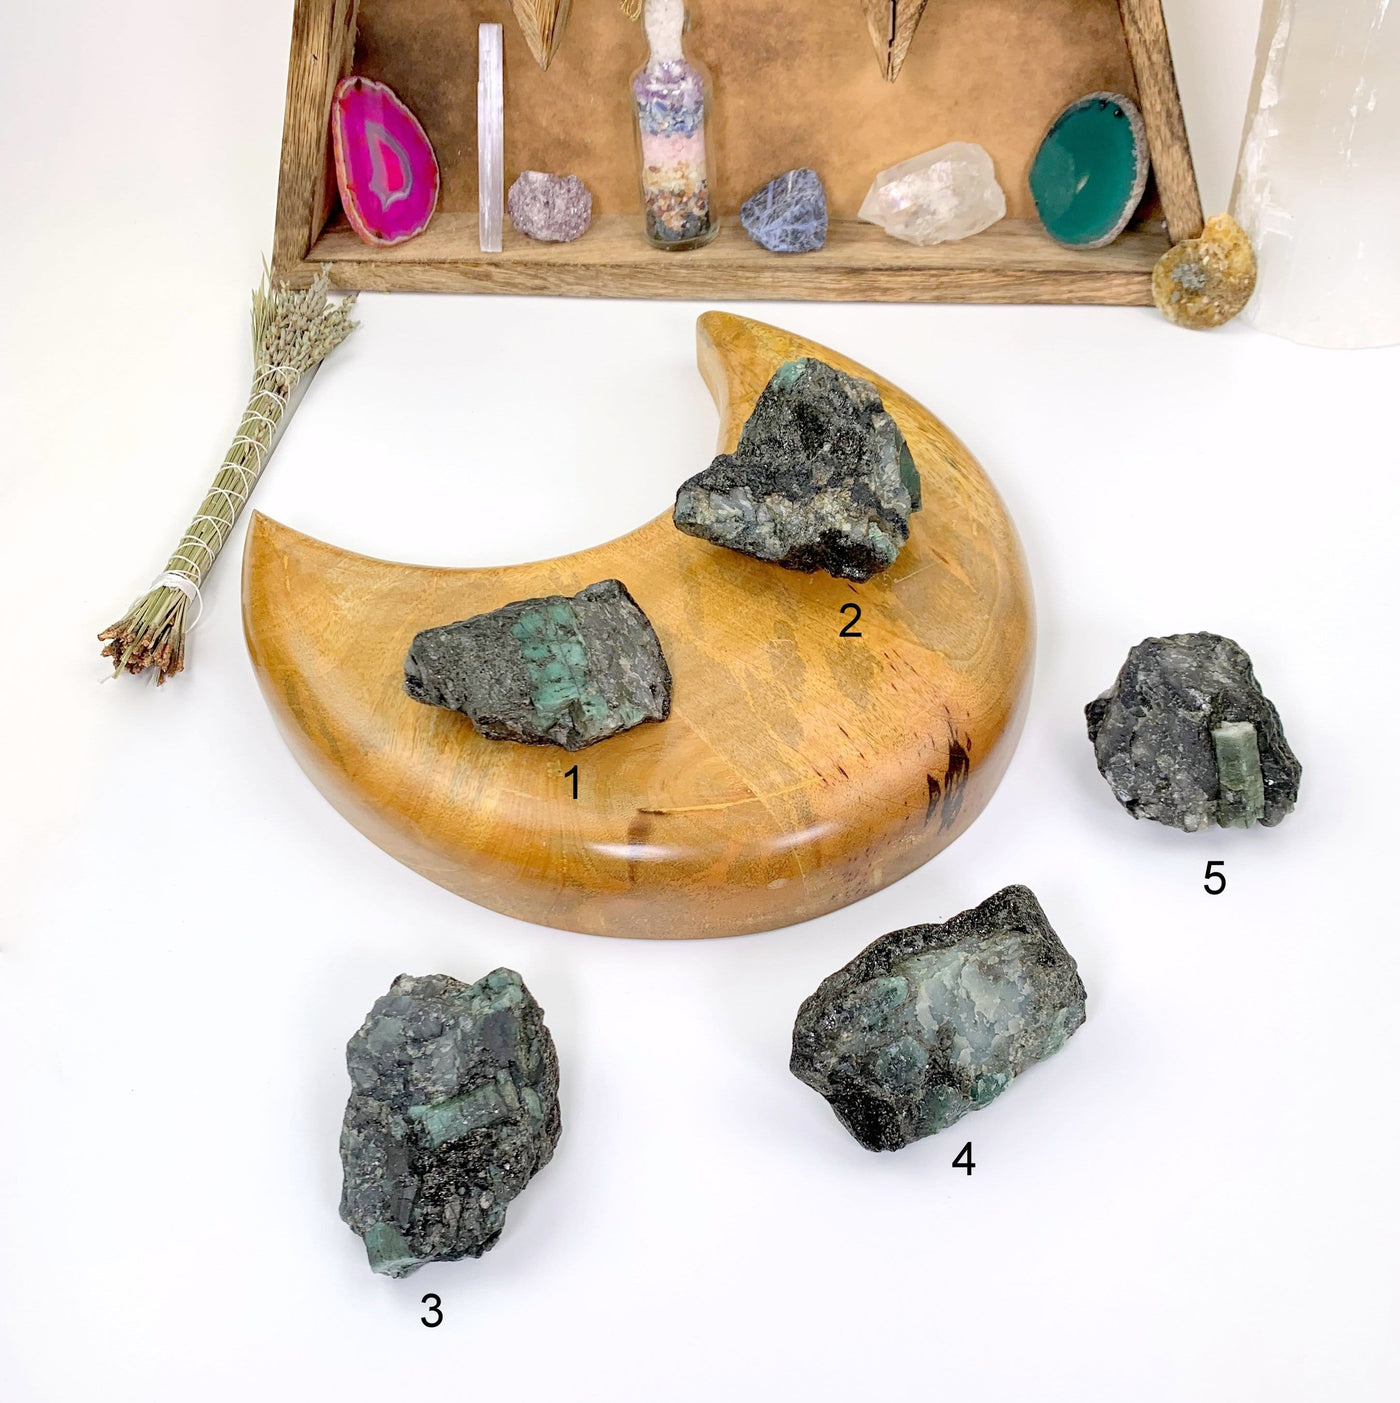 All five pieces of rough emerald labeled with a number.